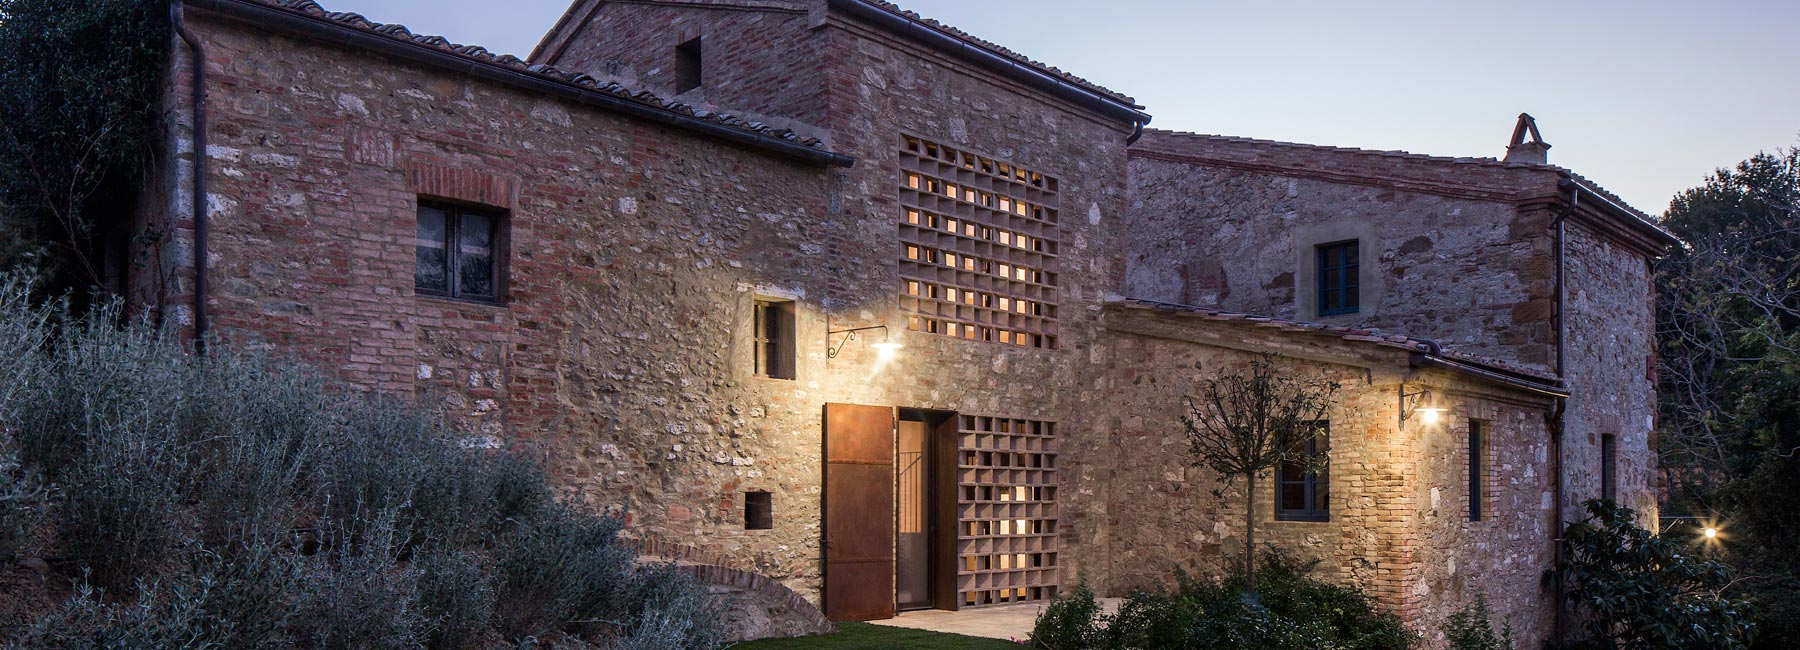 ciclostile's farmhouse in italy pays attention to historical context and environment